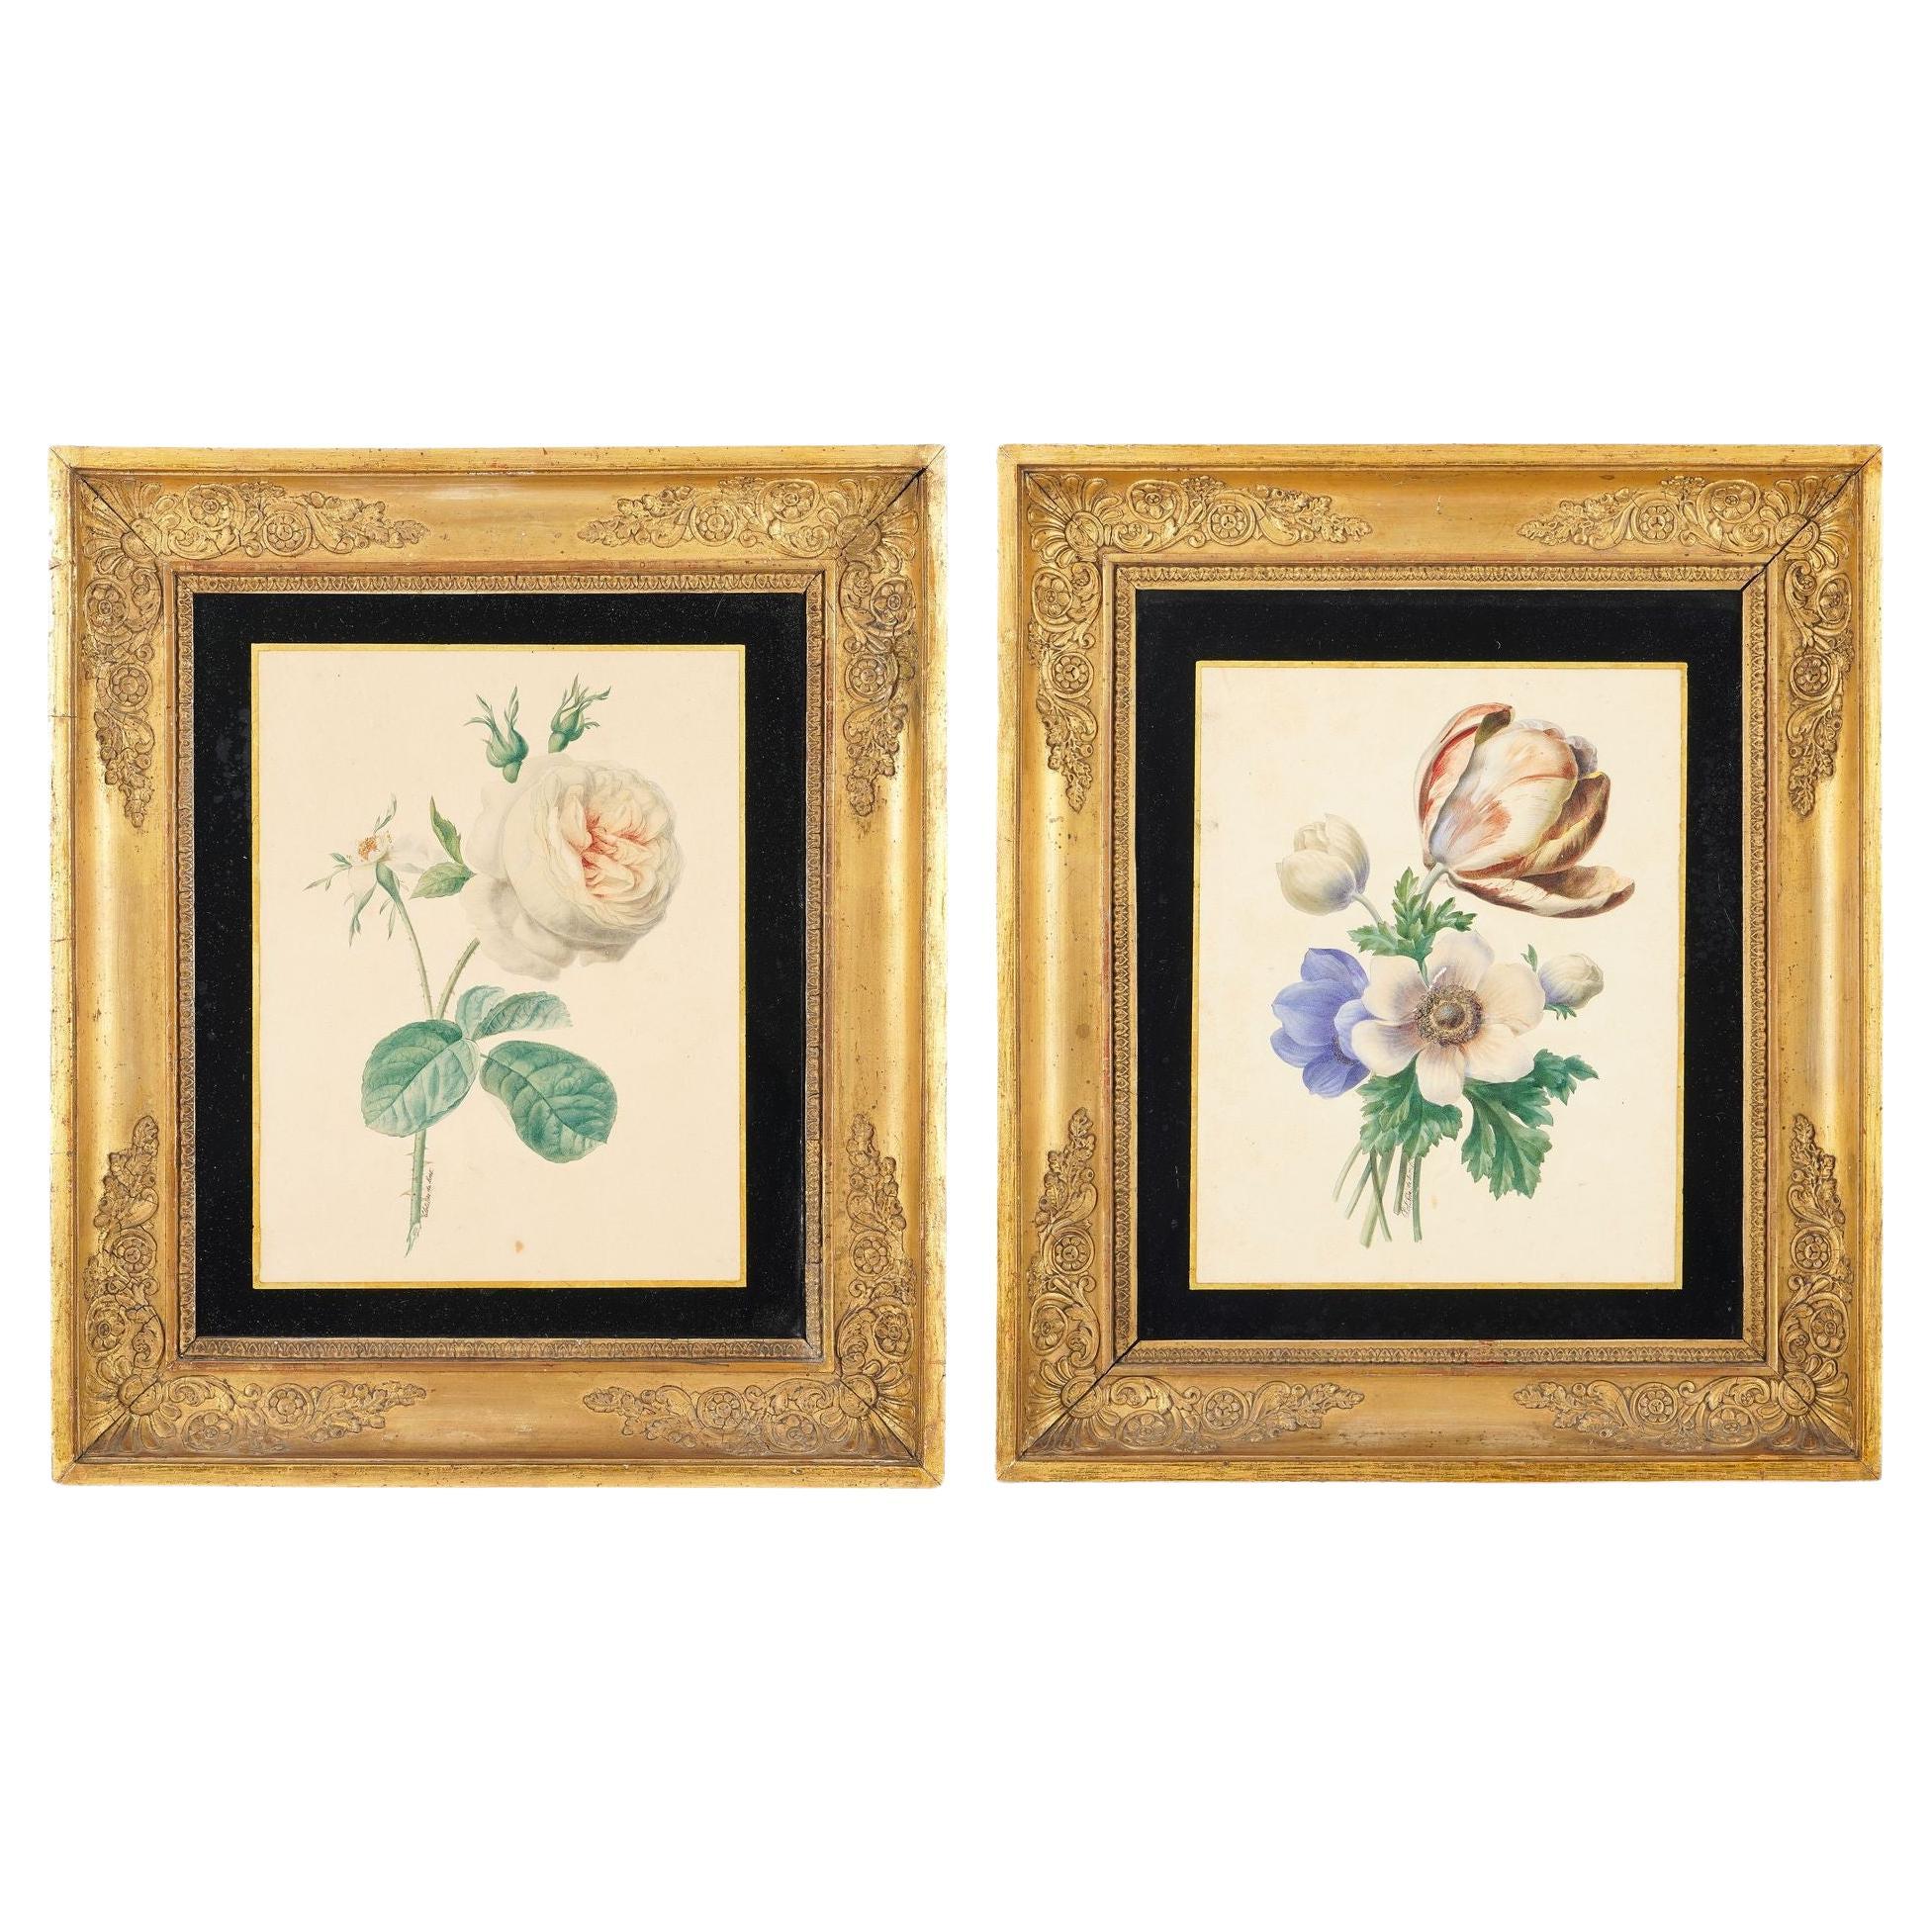 Pair of French botanical watercolors by Clotilde de Bost, c. 1815